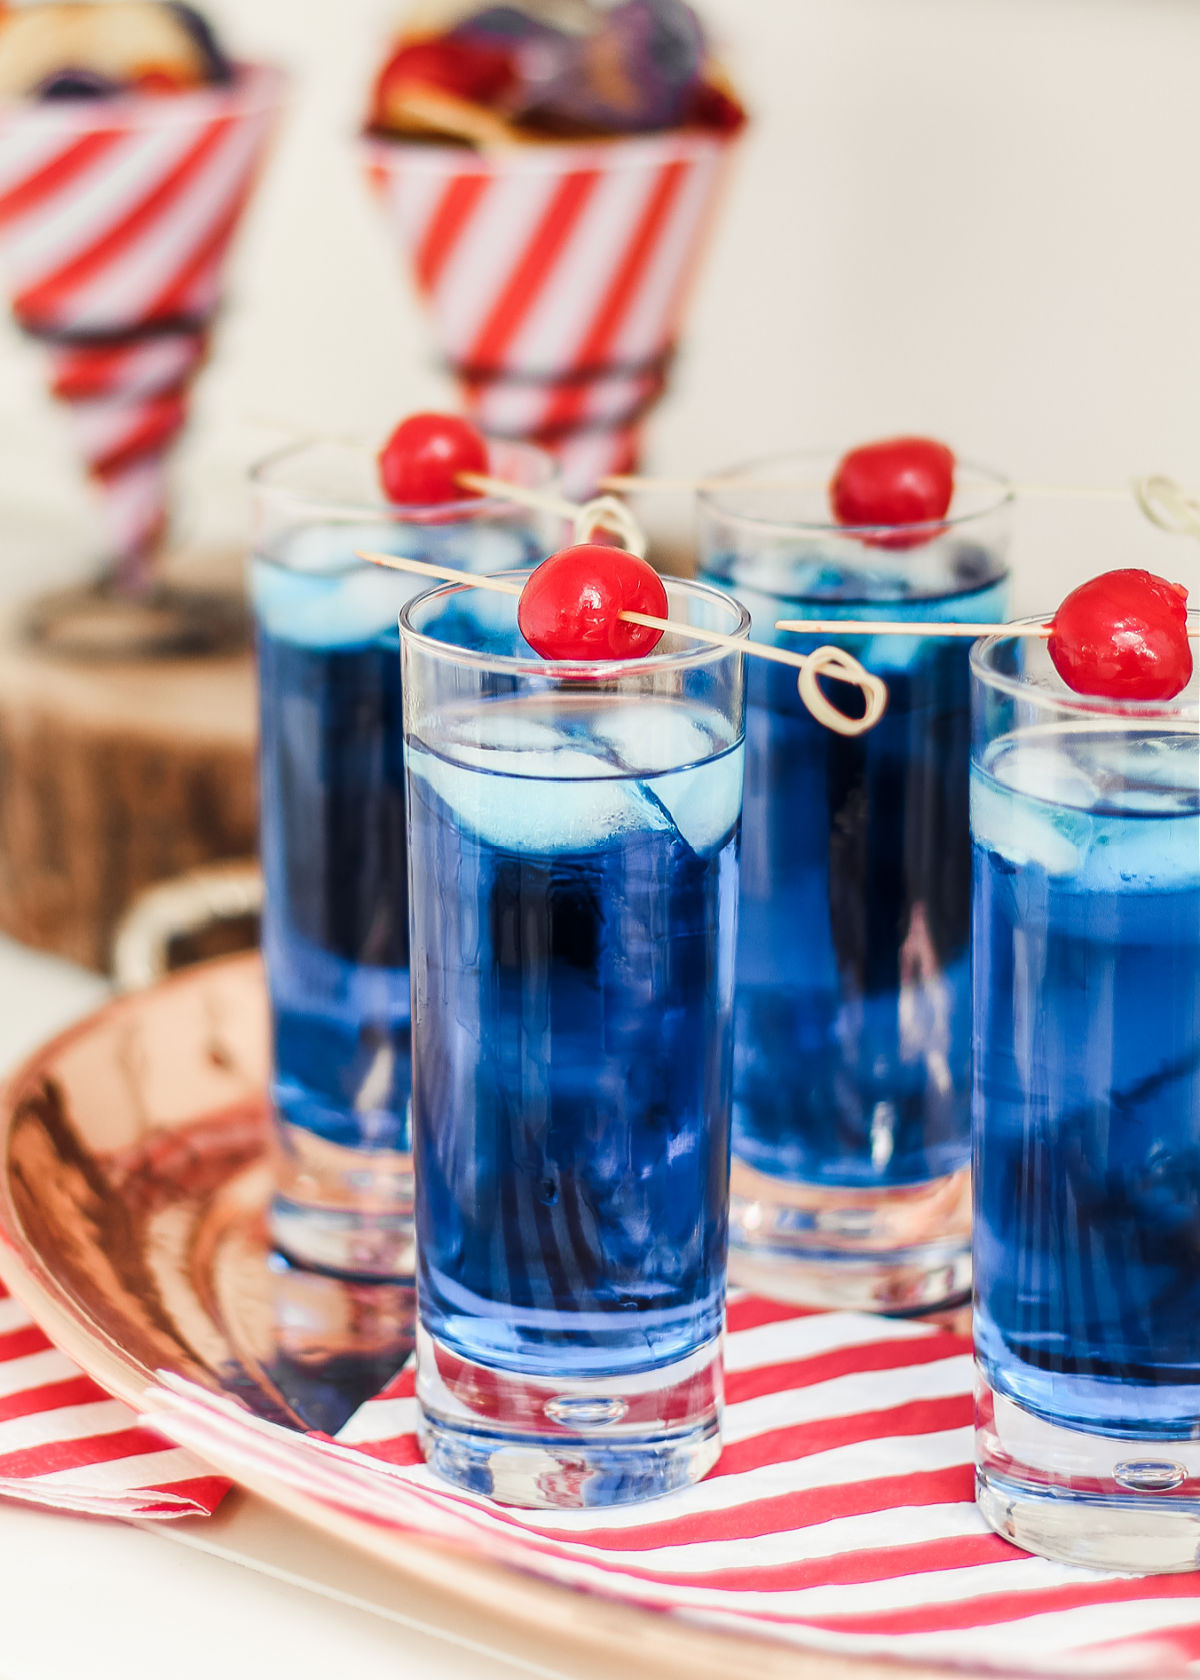 tray of blue curacao cocktails garnished with cherries on picks.